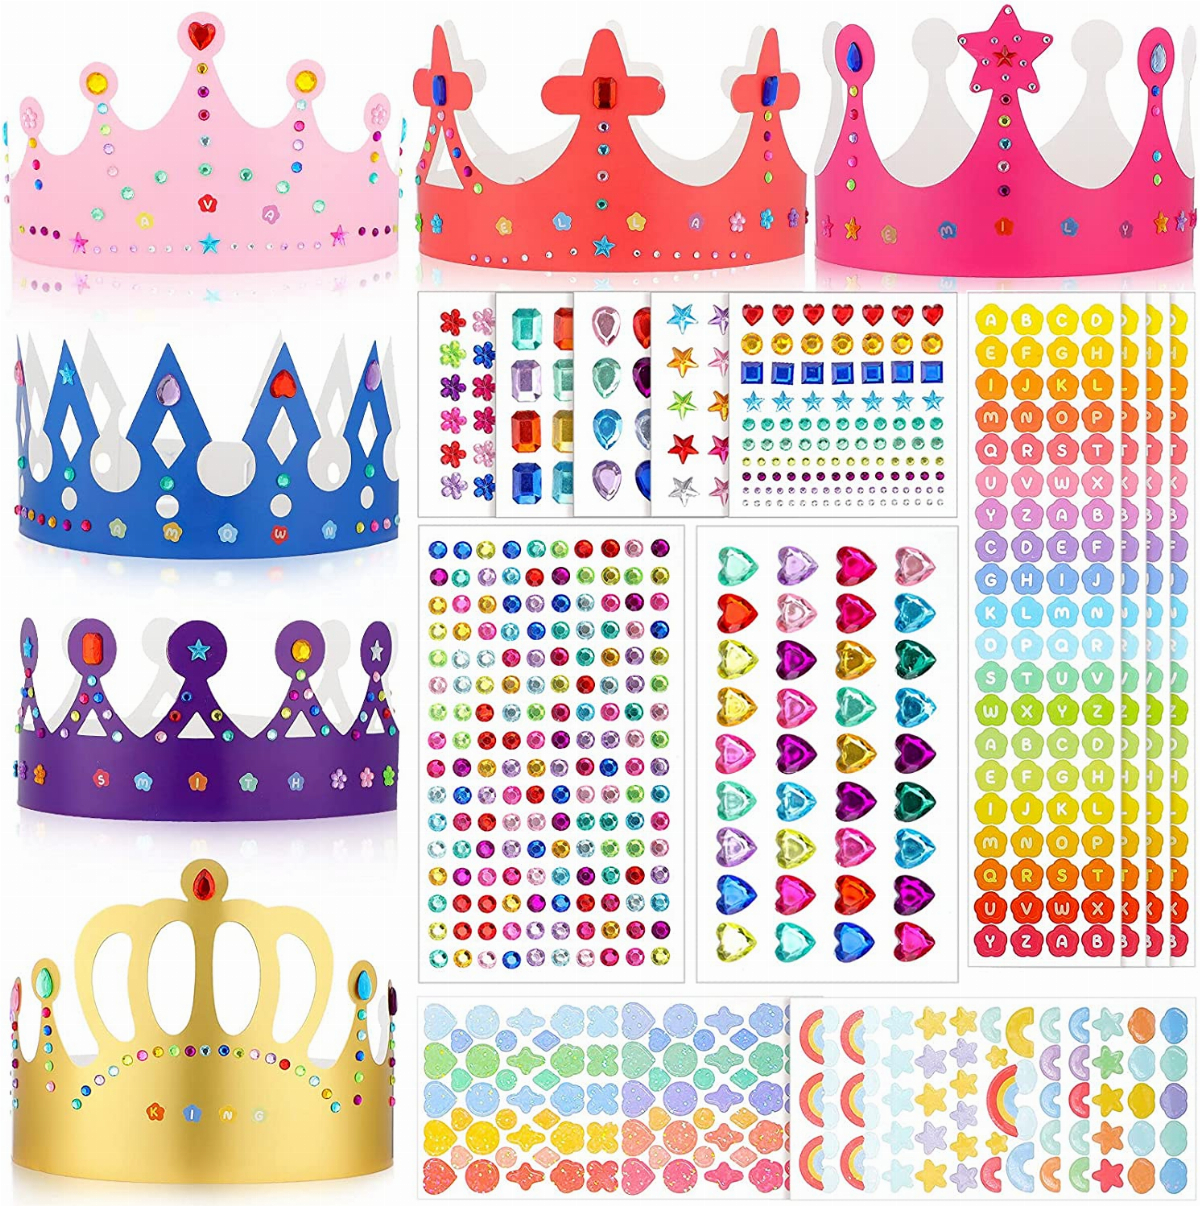 Paper Crowns Princess Prince Crown Kids Birthday Party King Hats Gold gem Jewels Number Letter Stickers Boys Girls Adults DIY Decorate Decor Favor Supplies Classroom Classic Style,34 Pieces 